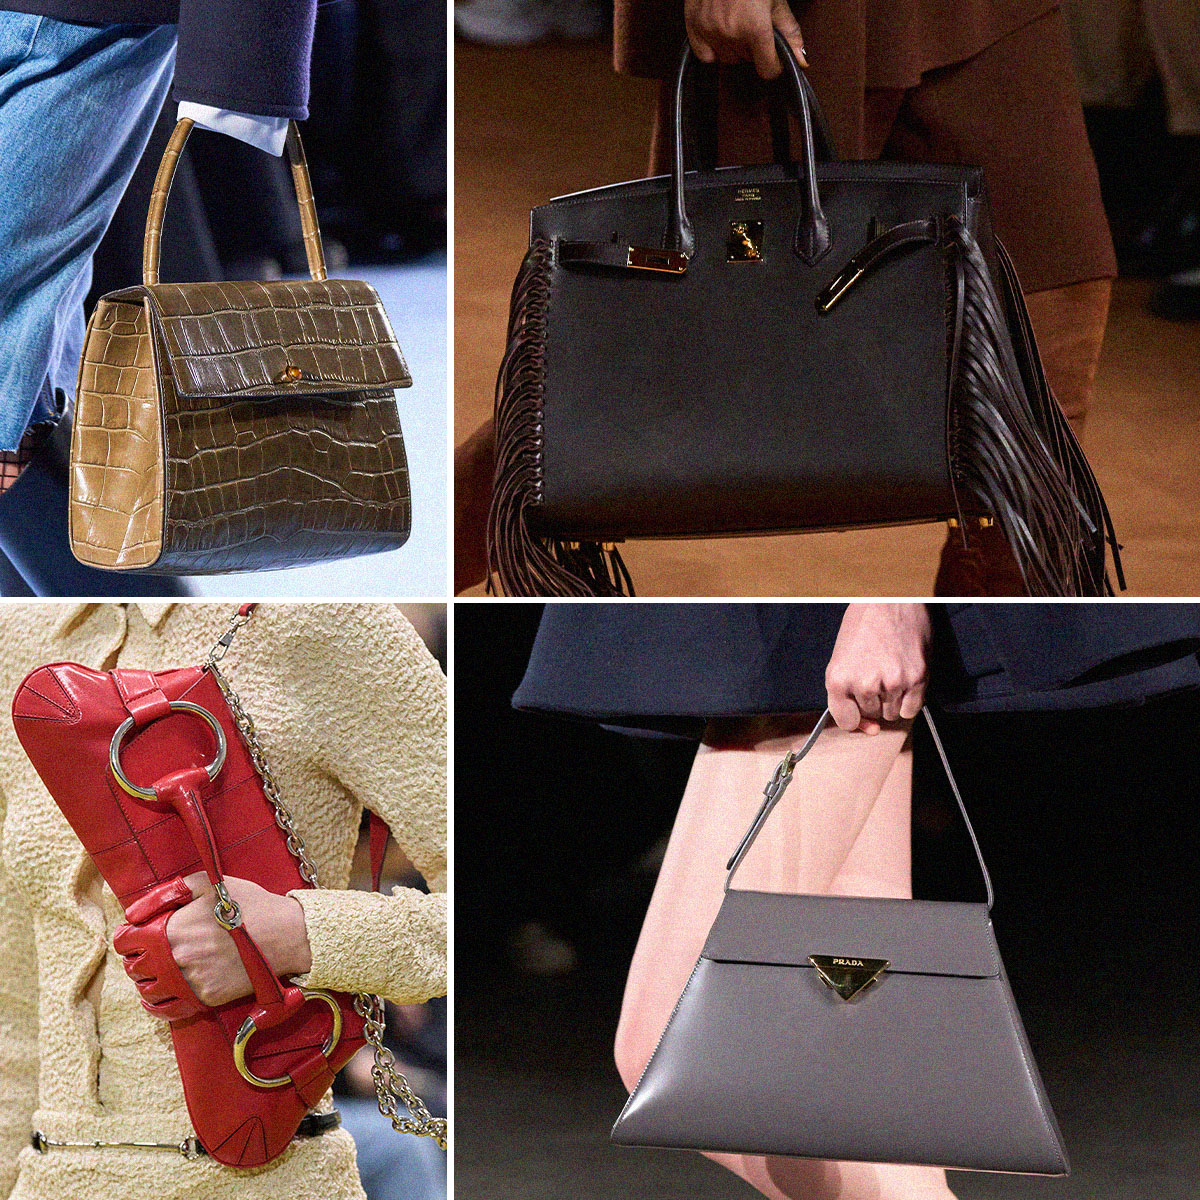 Why Birkin Bags Are So Expensive | So Expensive - YouTube